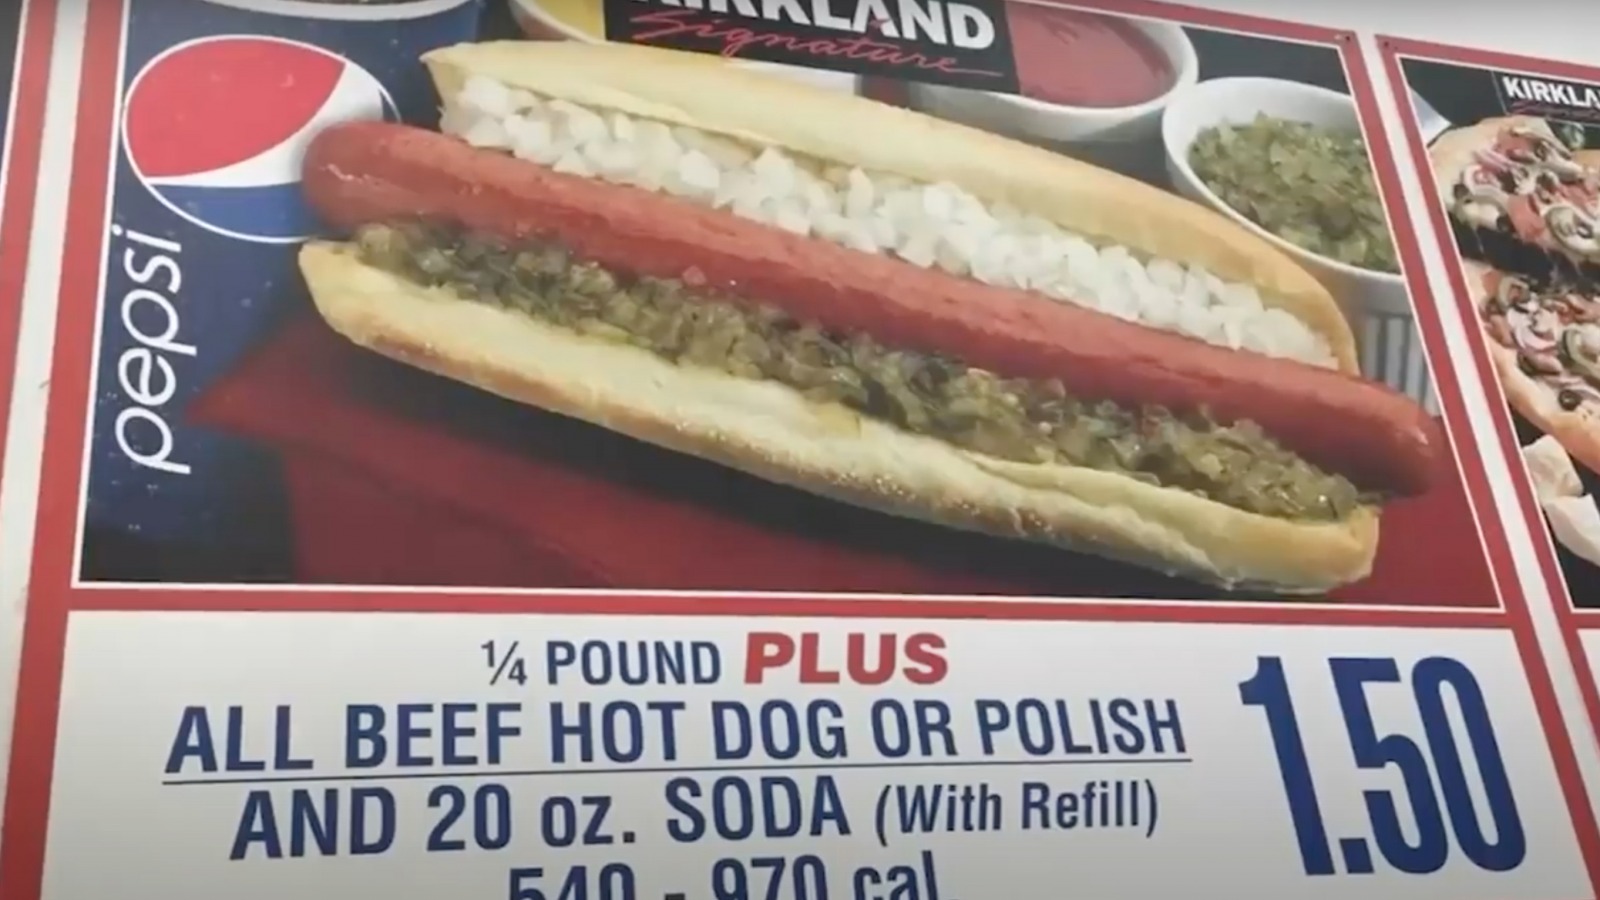 Costco CoFounder's Harsh Words About A Hot Dog Price Increase Are